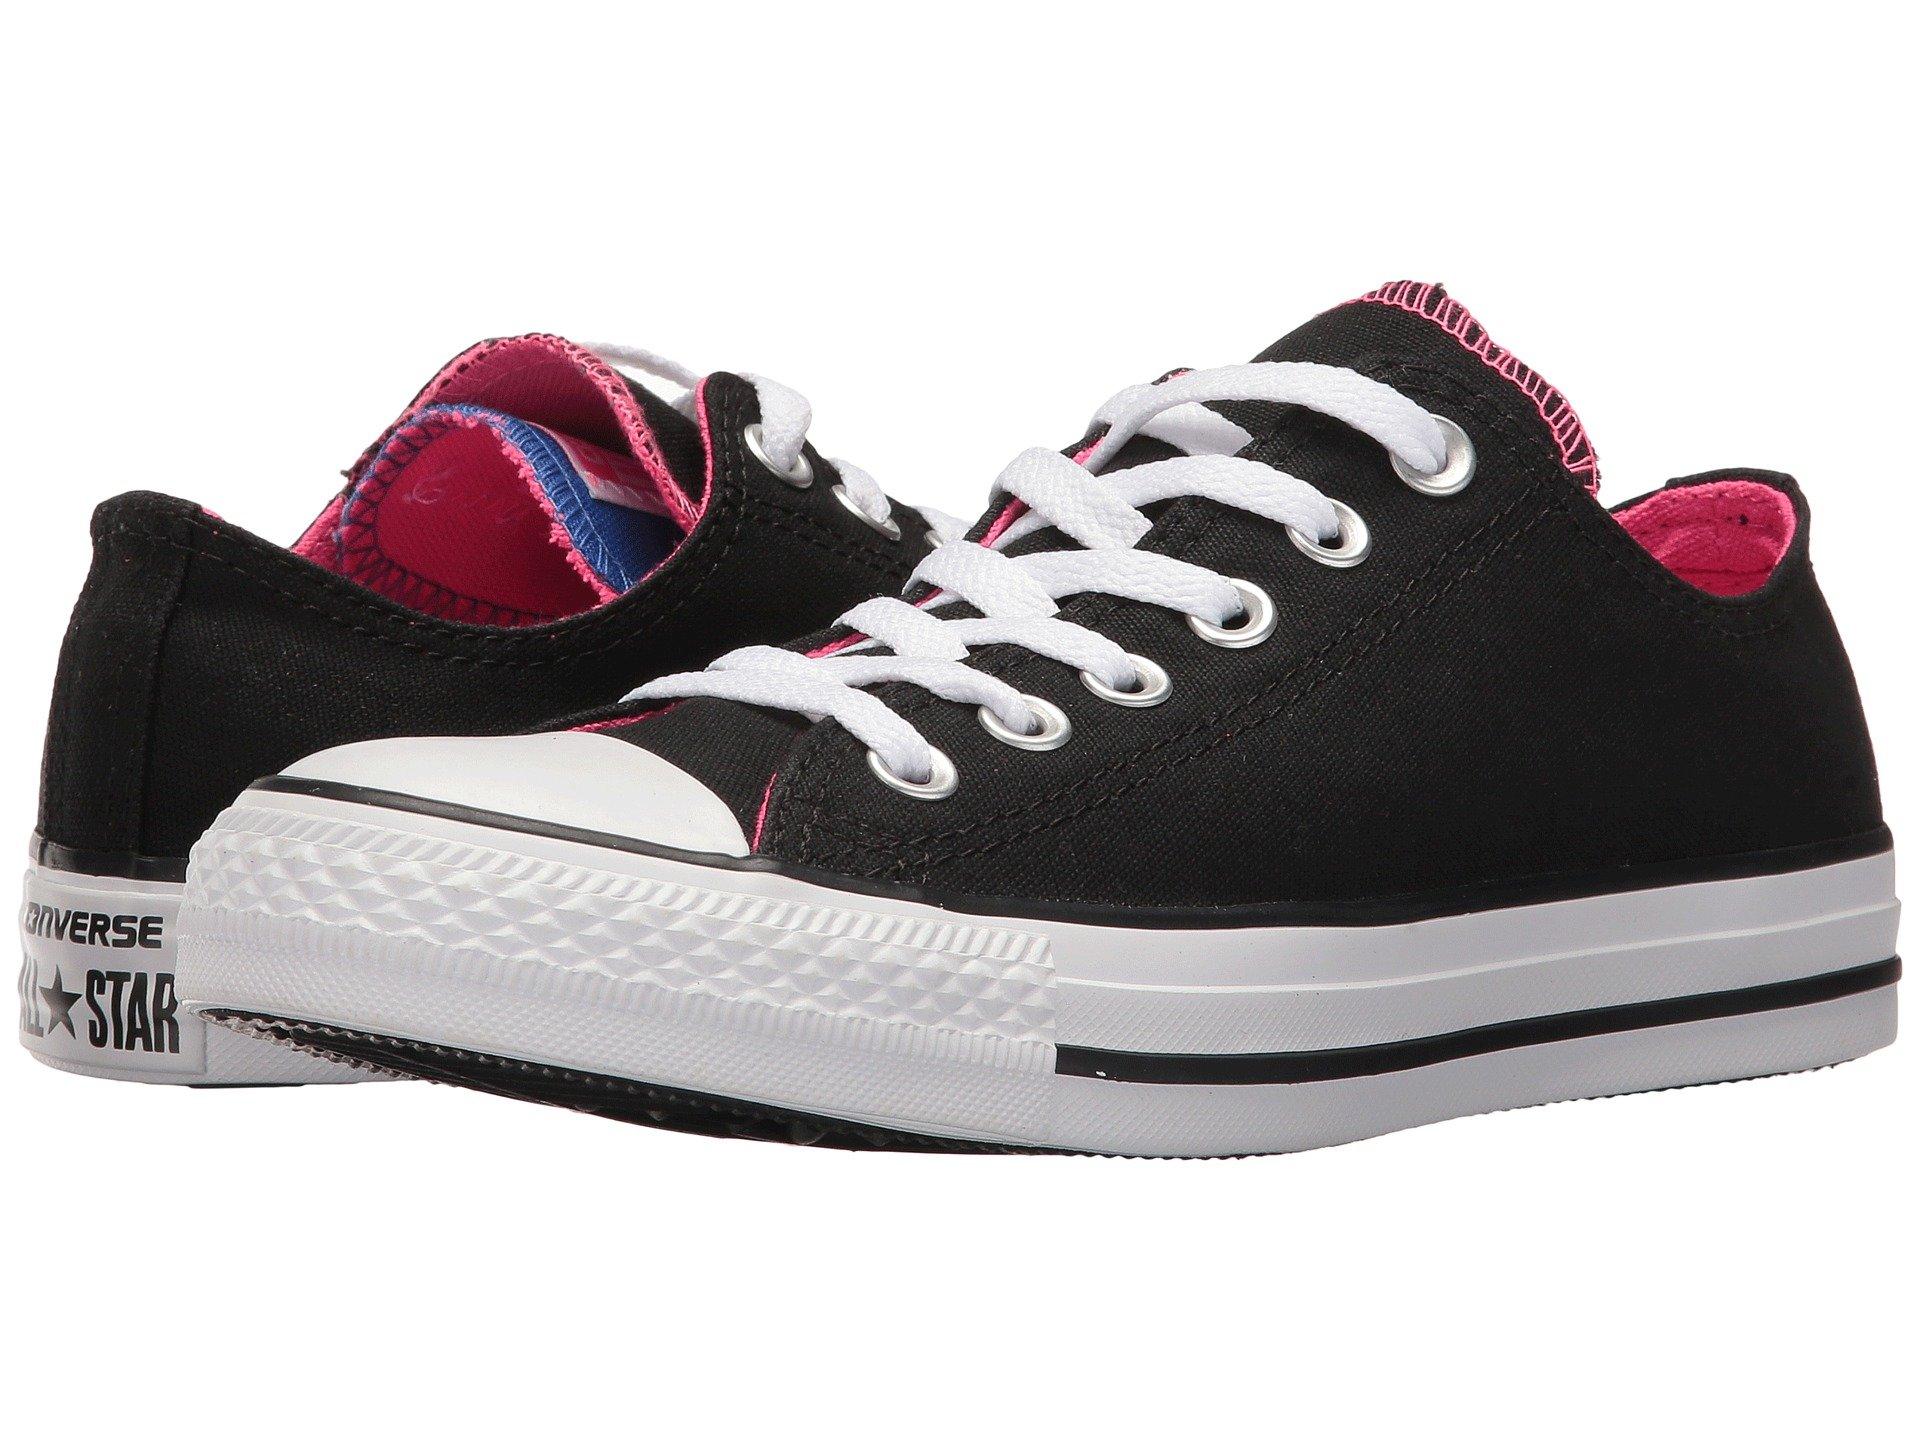 converse all star ox double tongue grey pink